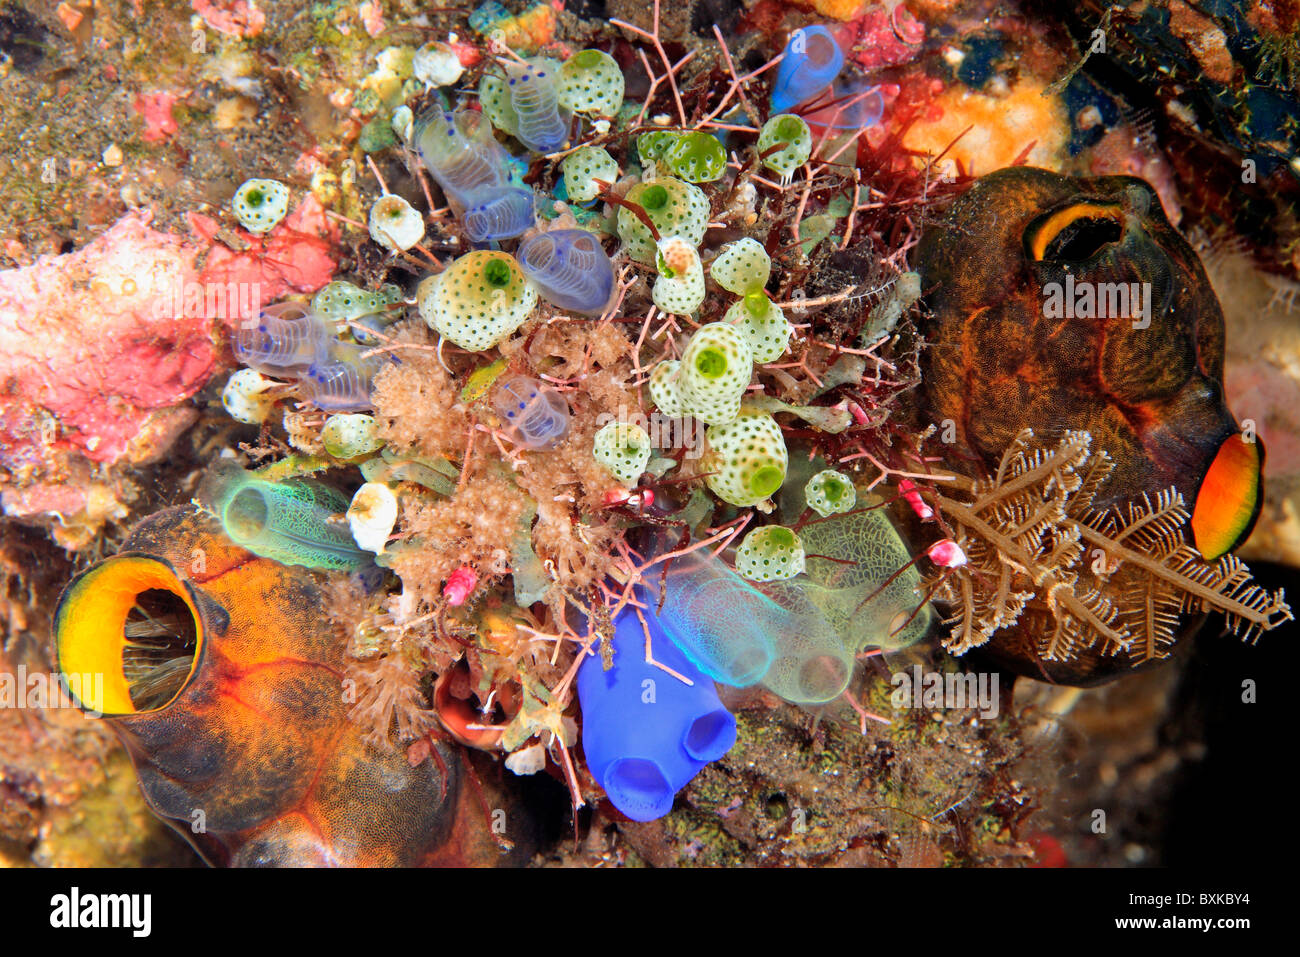 Group of bright and colourful sea squirts, tunicates, or ascidians. Stock Photo